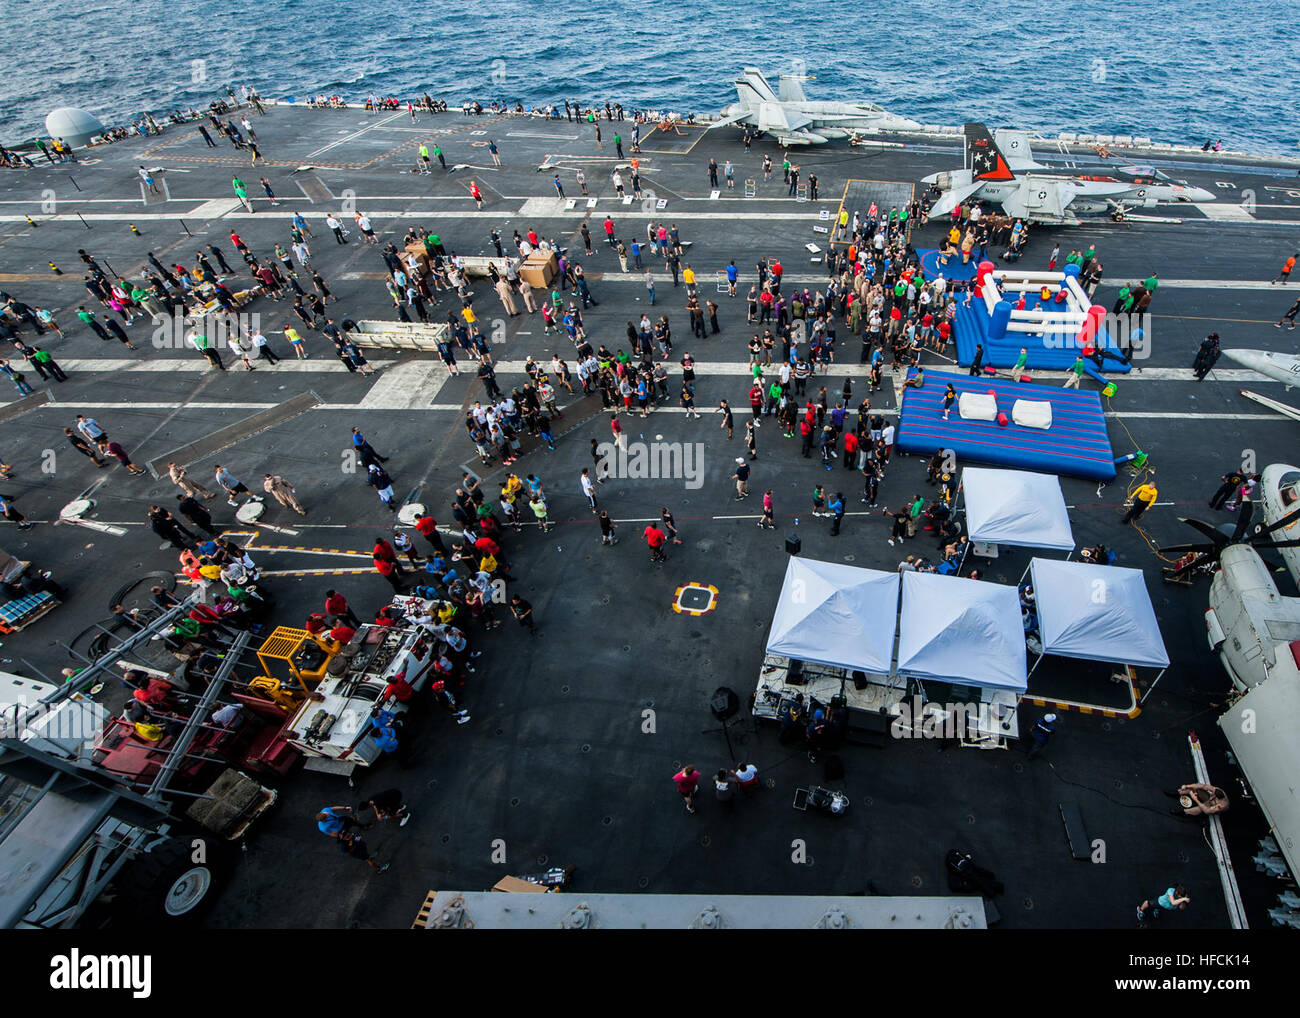 Sailors relax during a steel beach picnic on the flight deck of the Nimitz-class aircraft carrier USS Carl Vinson (CVN 70). Carl Vinson is deployed in the U.S. 5th Fleet area of operations supporting Operation Inherent Resolve, strike operations in Iraq and Syria as directed, maritime security operations, and theater security cooperation efforts in the region. (U.S. Navy photo by Mass Communication Specialist 2nd Class Alex King/Released) Operation Inherent Resolve 141102-N-WD464-113 Stock Photo